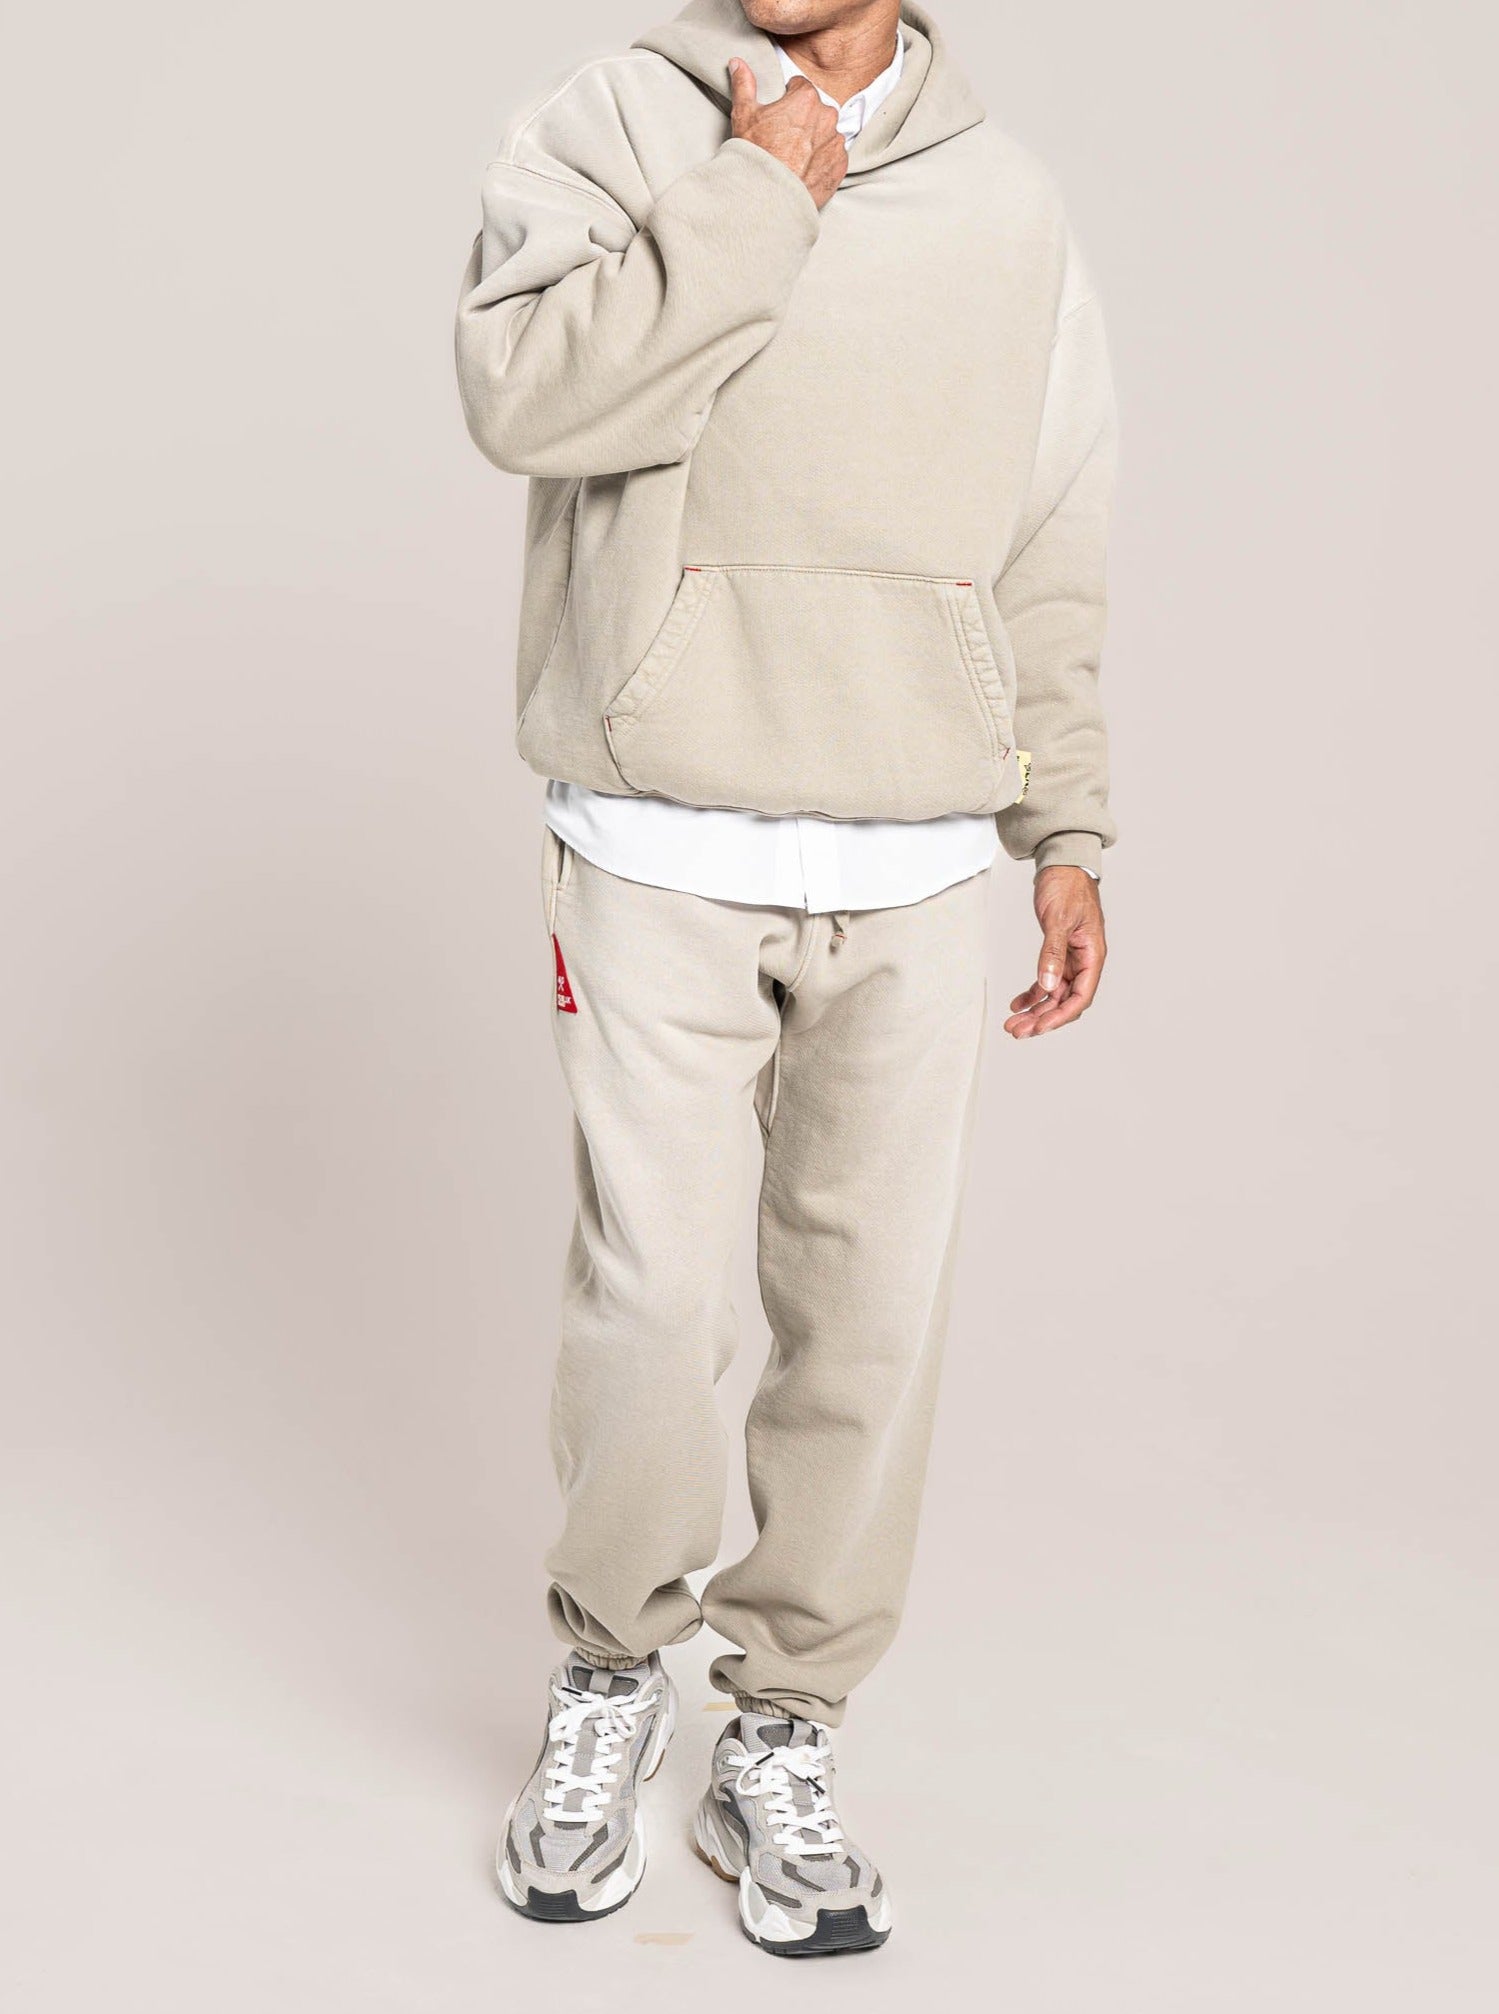 Publik Brand Single Layered Hoodie Old Wood Heavyweight Fleece and old wood relaxed sweatpants set, all made in USA